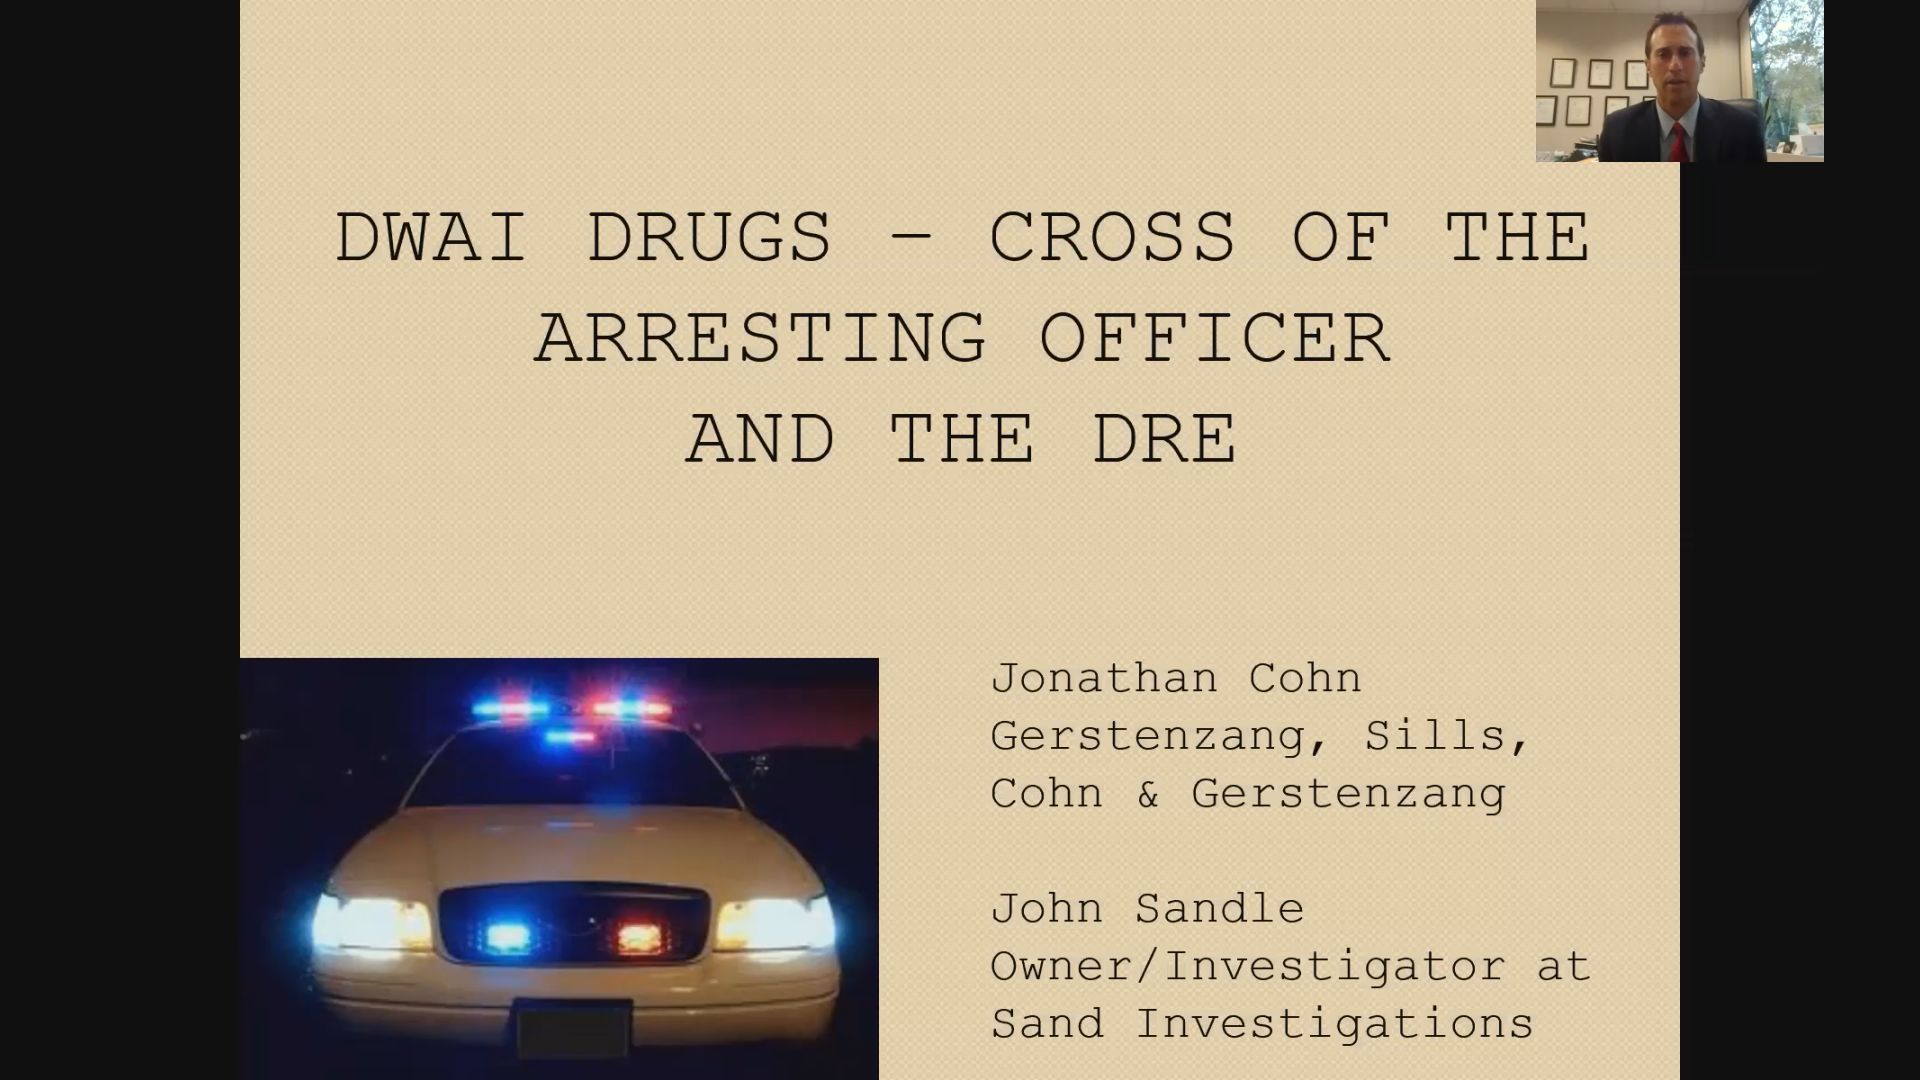 Cross Examination of the Arresting Officer and DRE in a DWAI Drugs Case Thumbnail